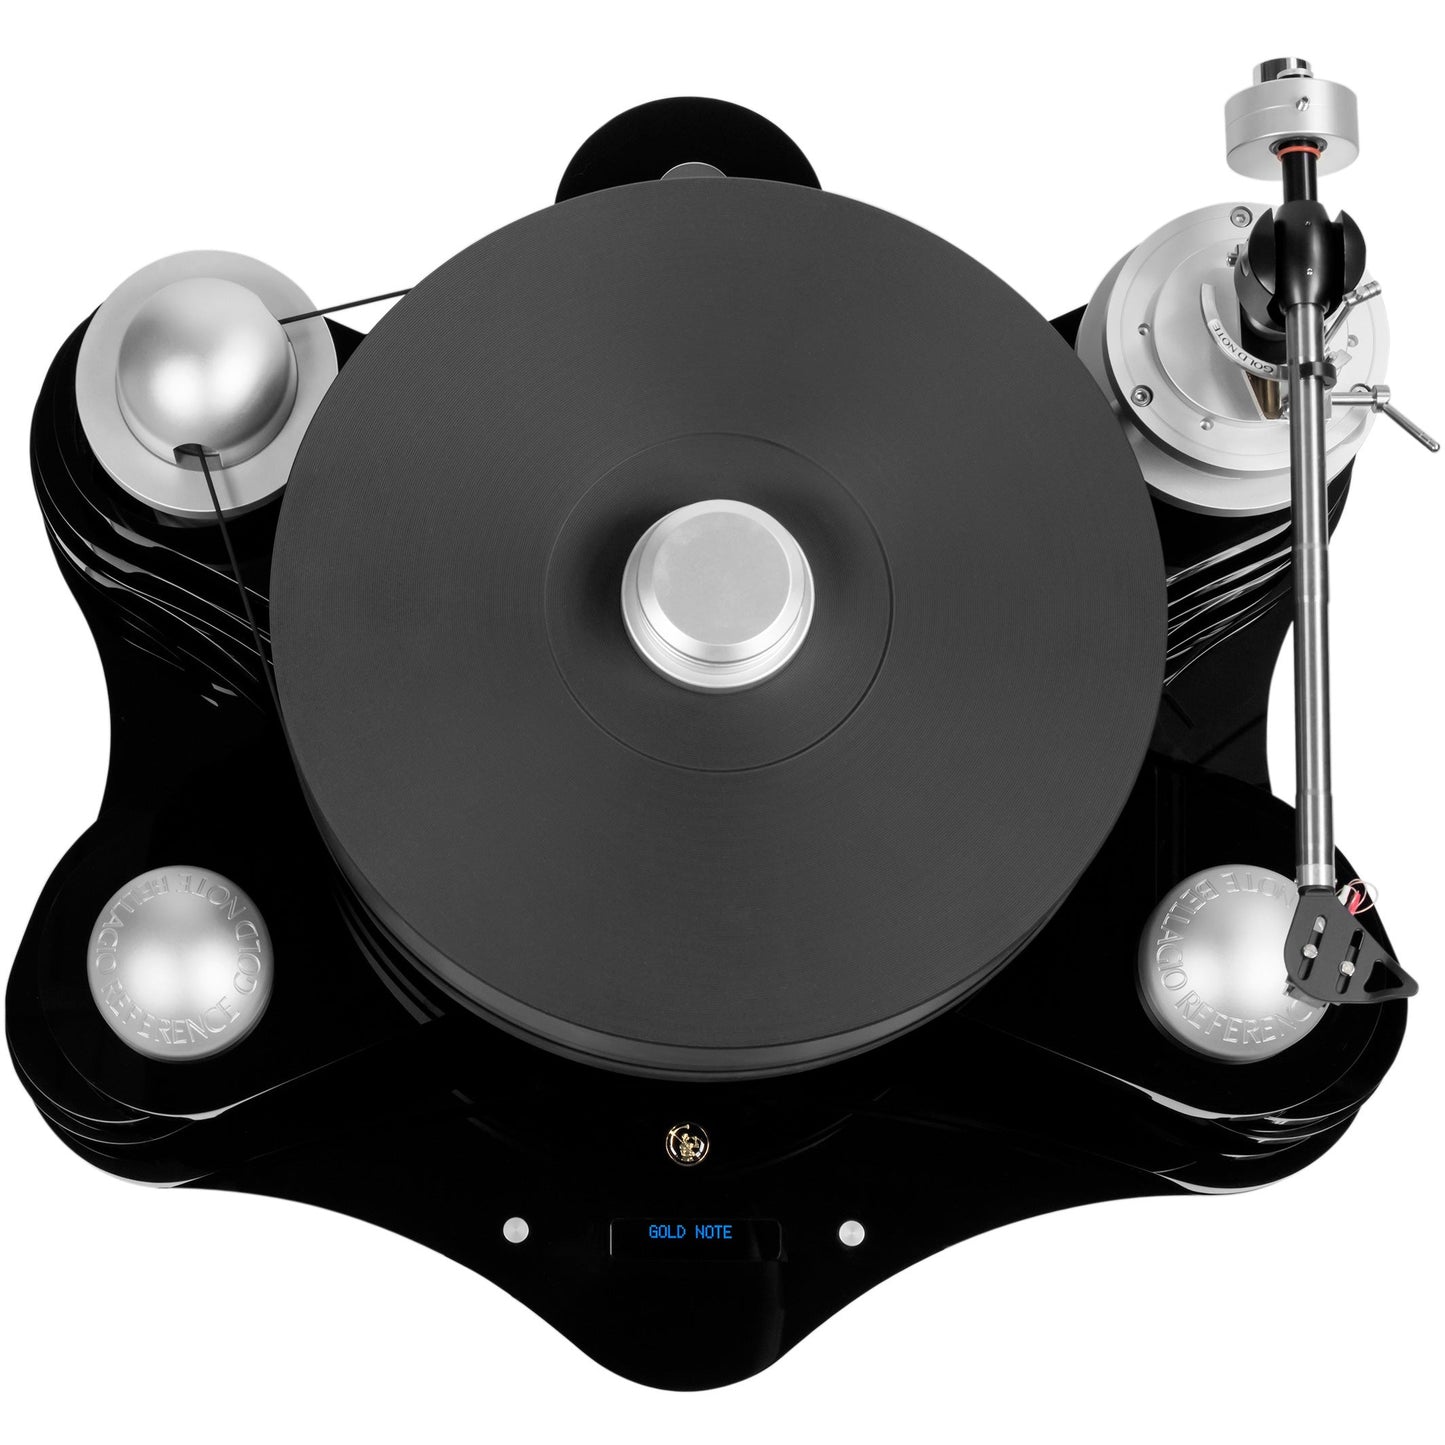 Gold Note Bellagio Reference Turntable